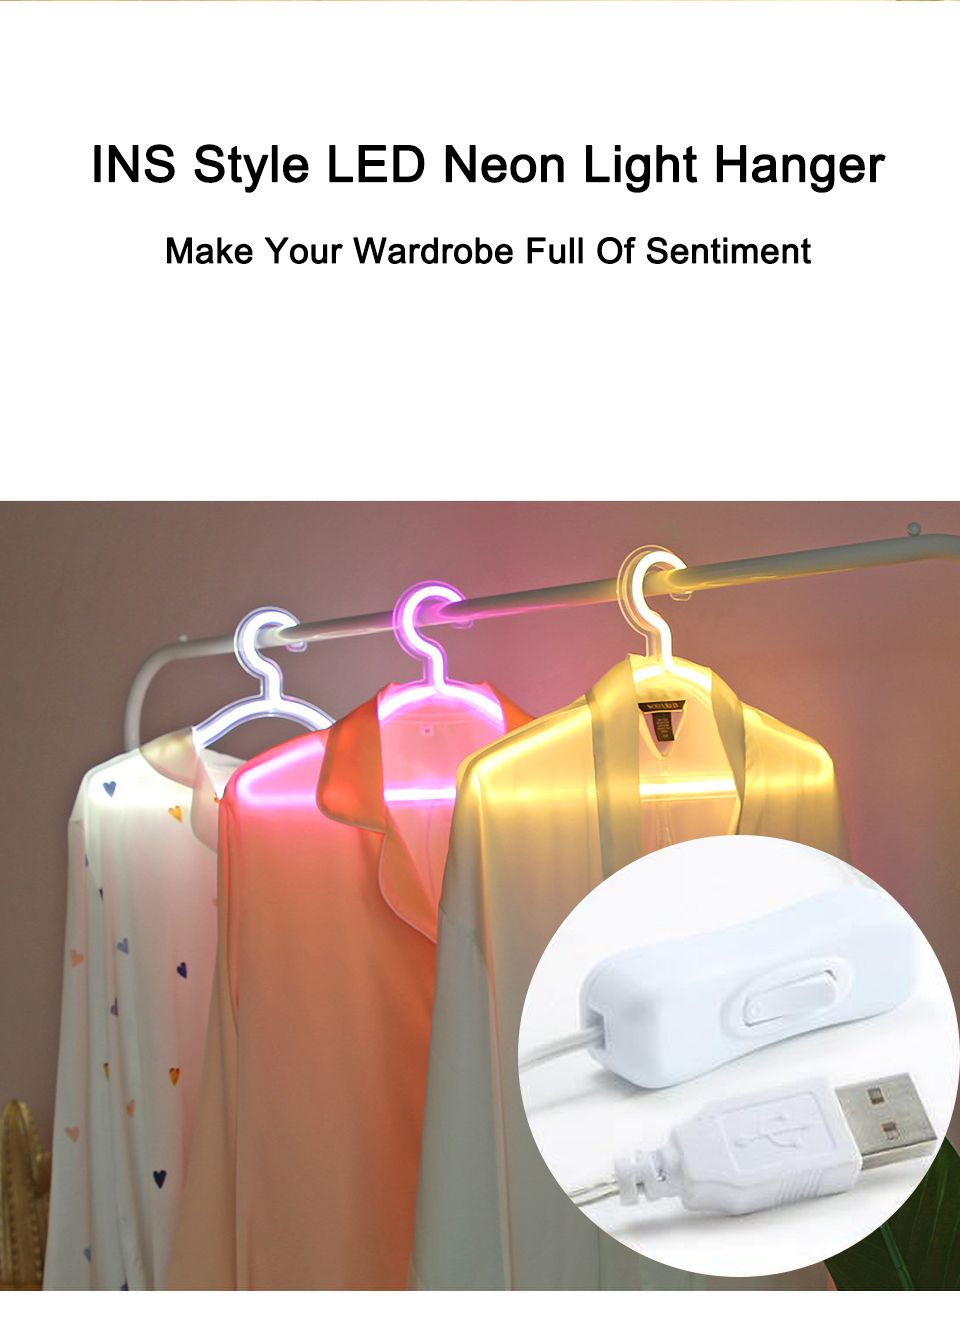 USB-LED-Neon-Clothes-Hanger-PVC-Neon-Sign-Night-Light-Colorful-For-Bedroom-Home-Wedding-Party-Decora-1817098-1